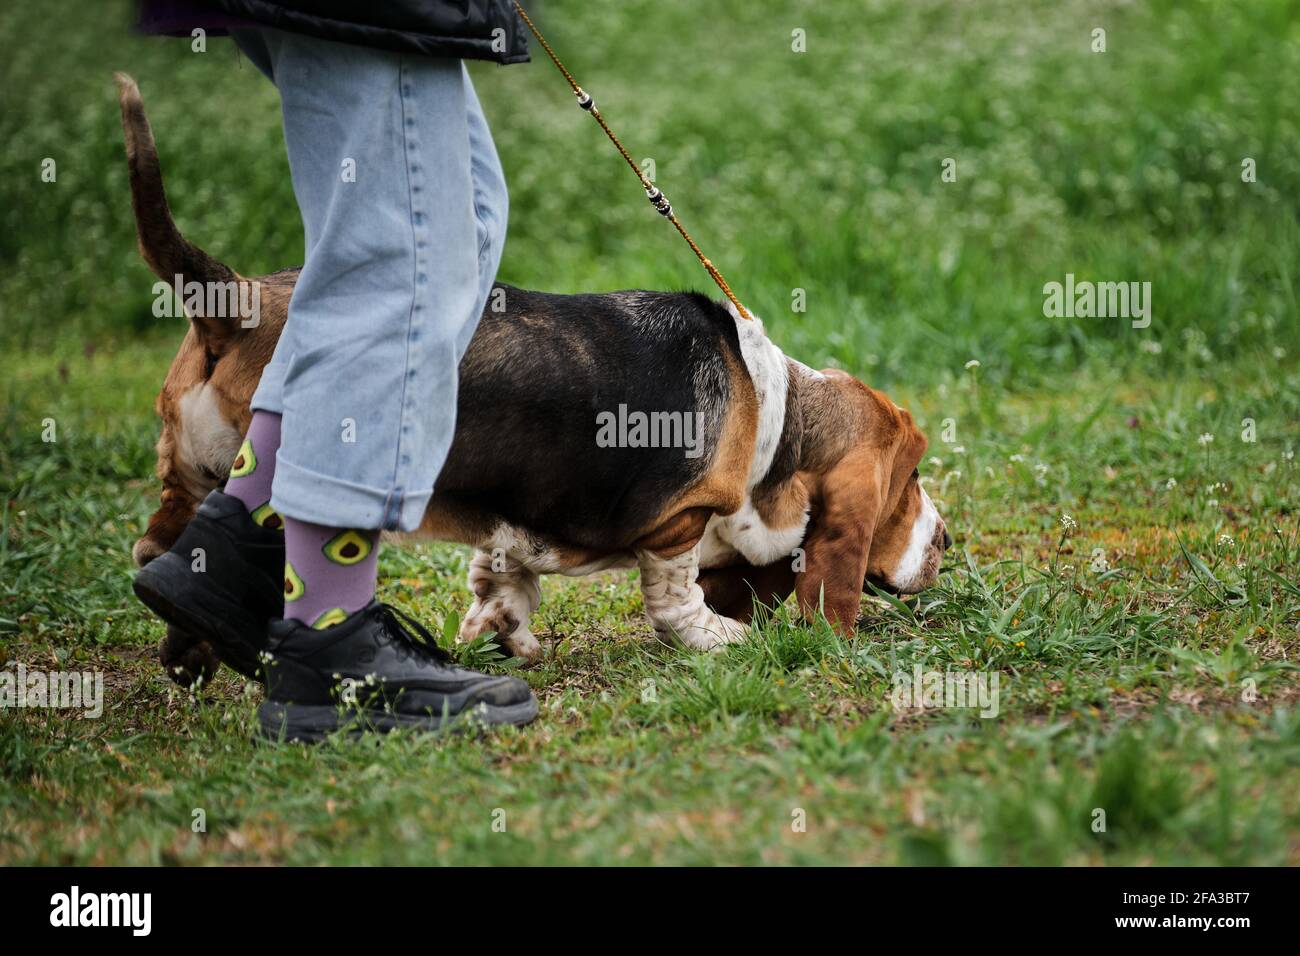 Russia, Krasnodar April 18, 2021-Dog show of all breeds. A large dog with short legs and long red ears. Basset Hound on walk with his headmaster in pa Stock Photo